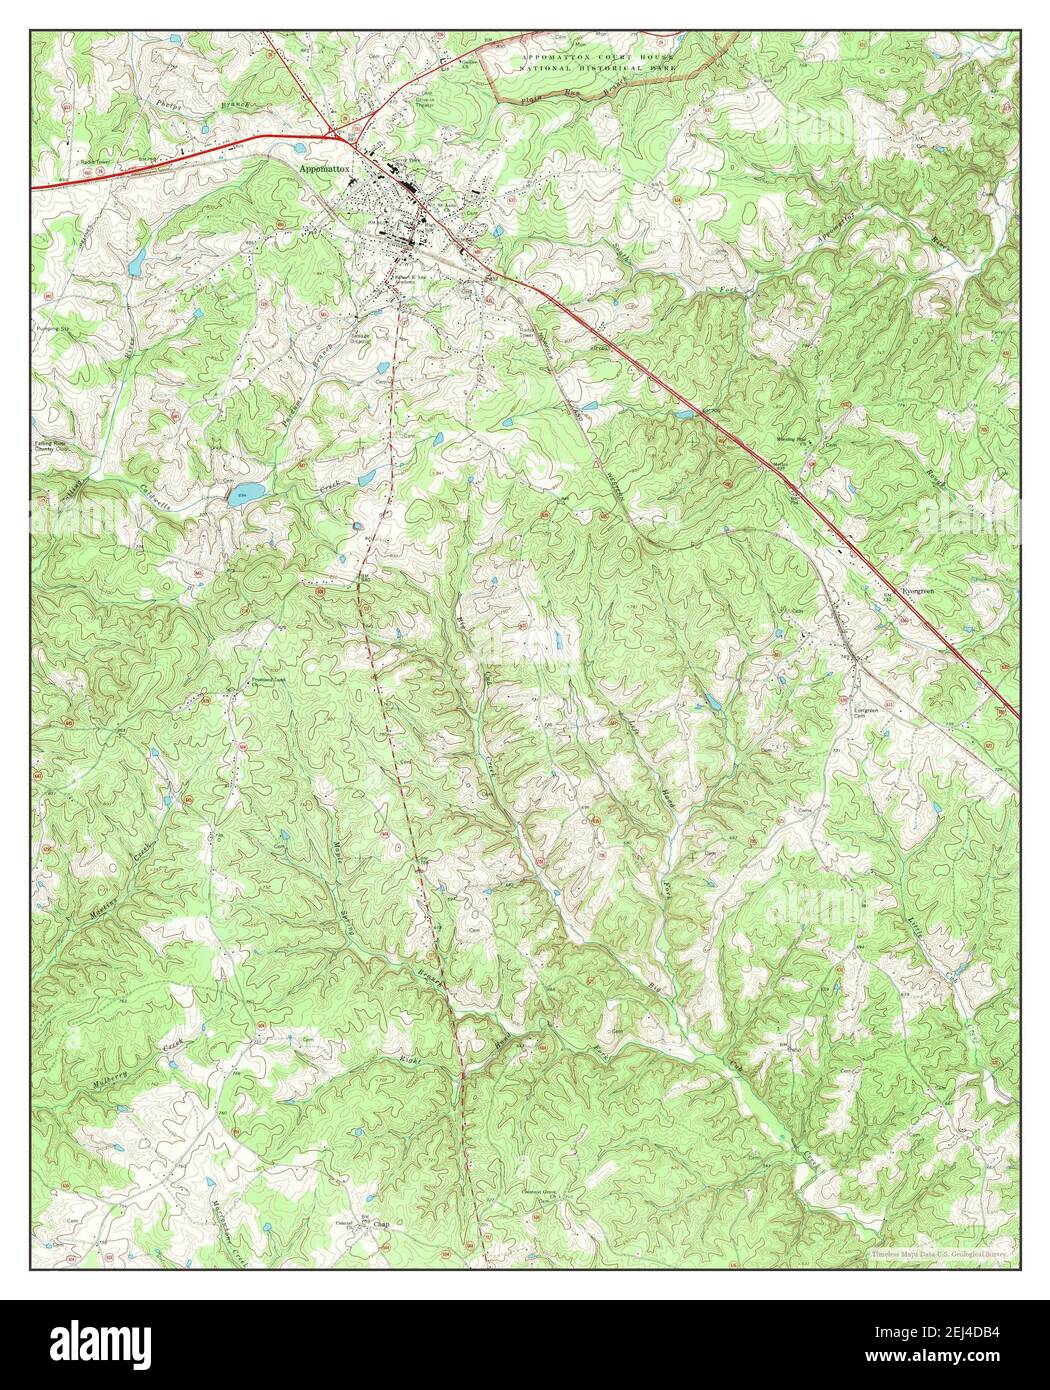 Appomattox, Virginia, map 1968, 1:24000, United States of America by Timeless Maps, data U.S. Geological Survey Stock Photo